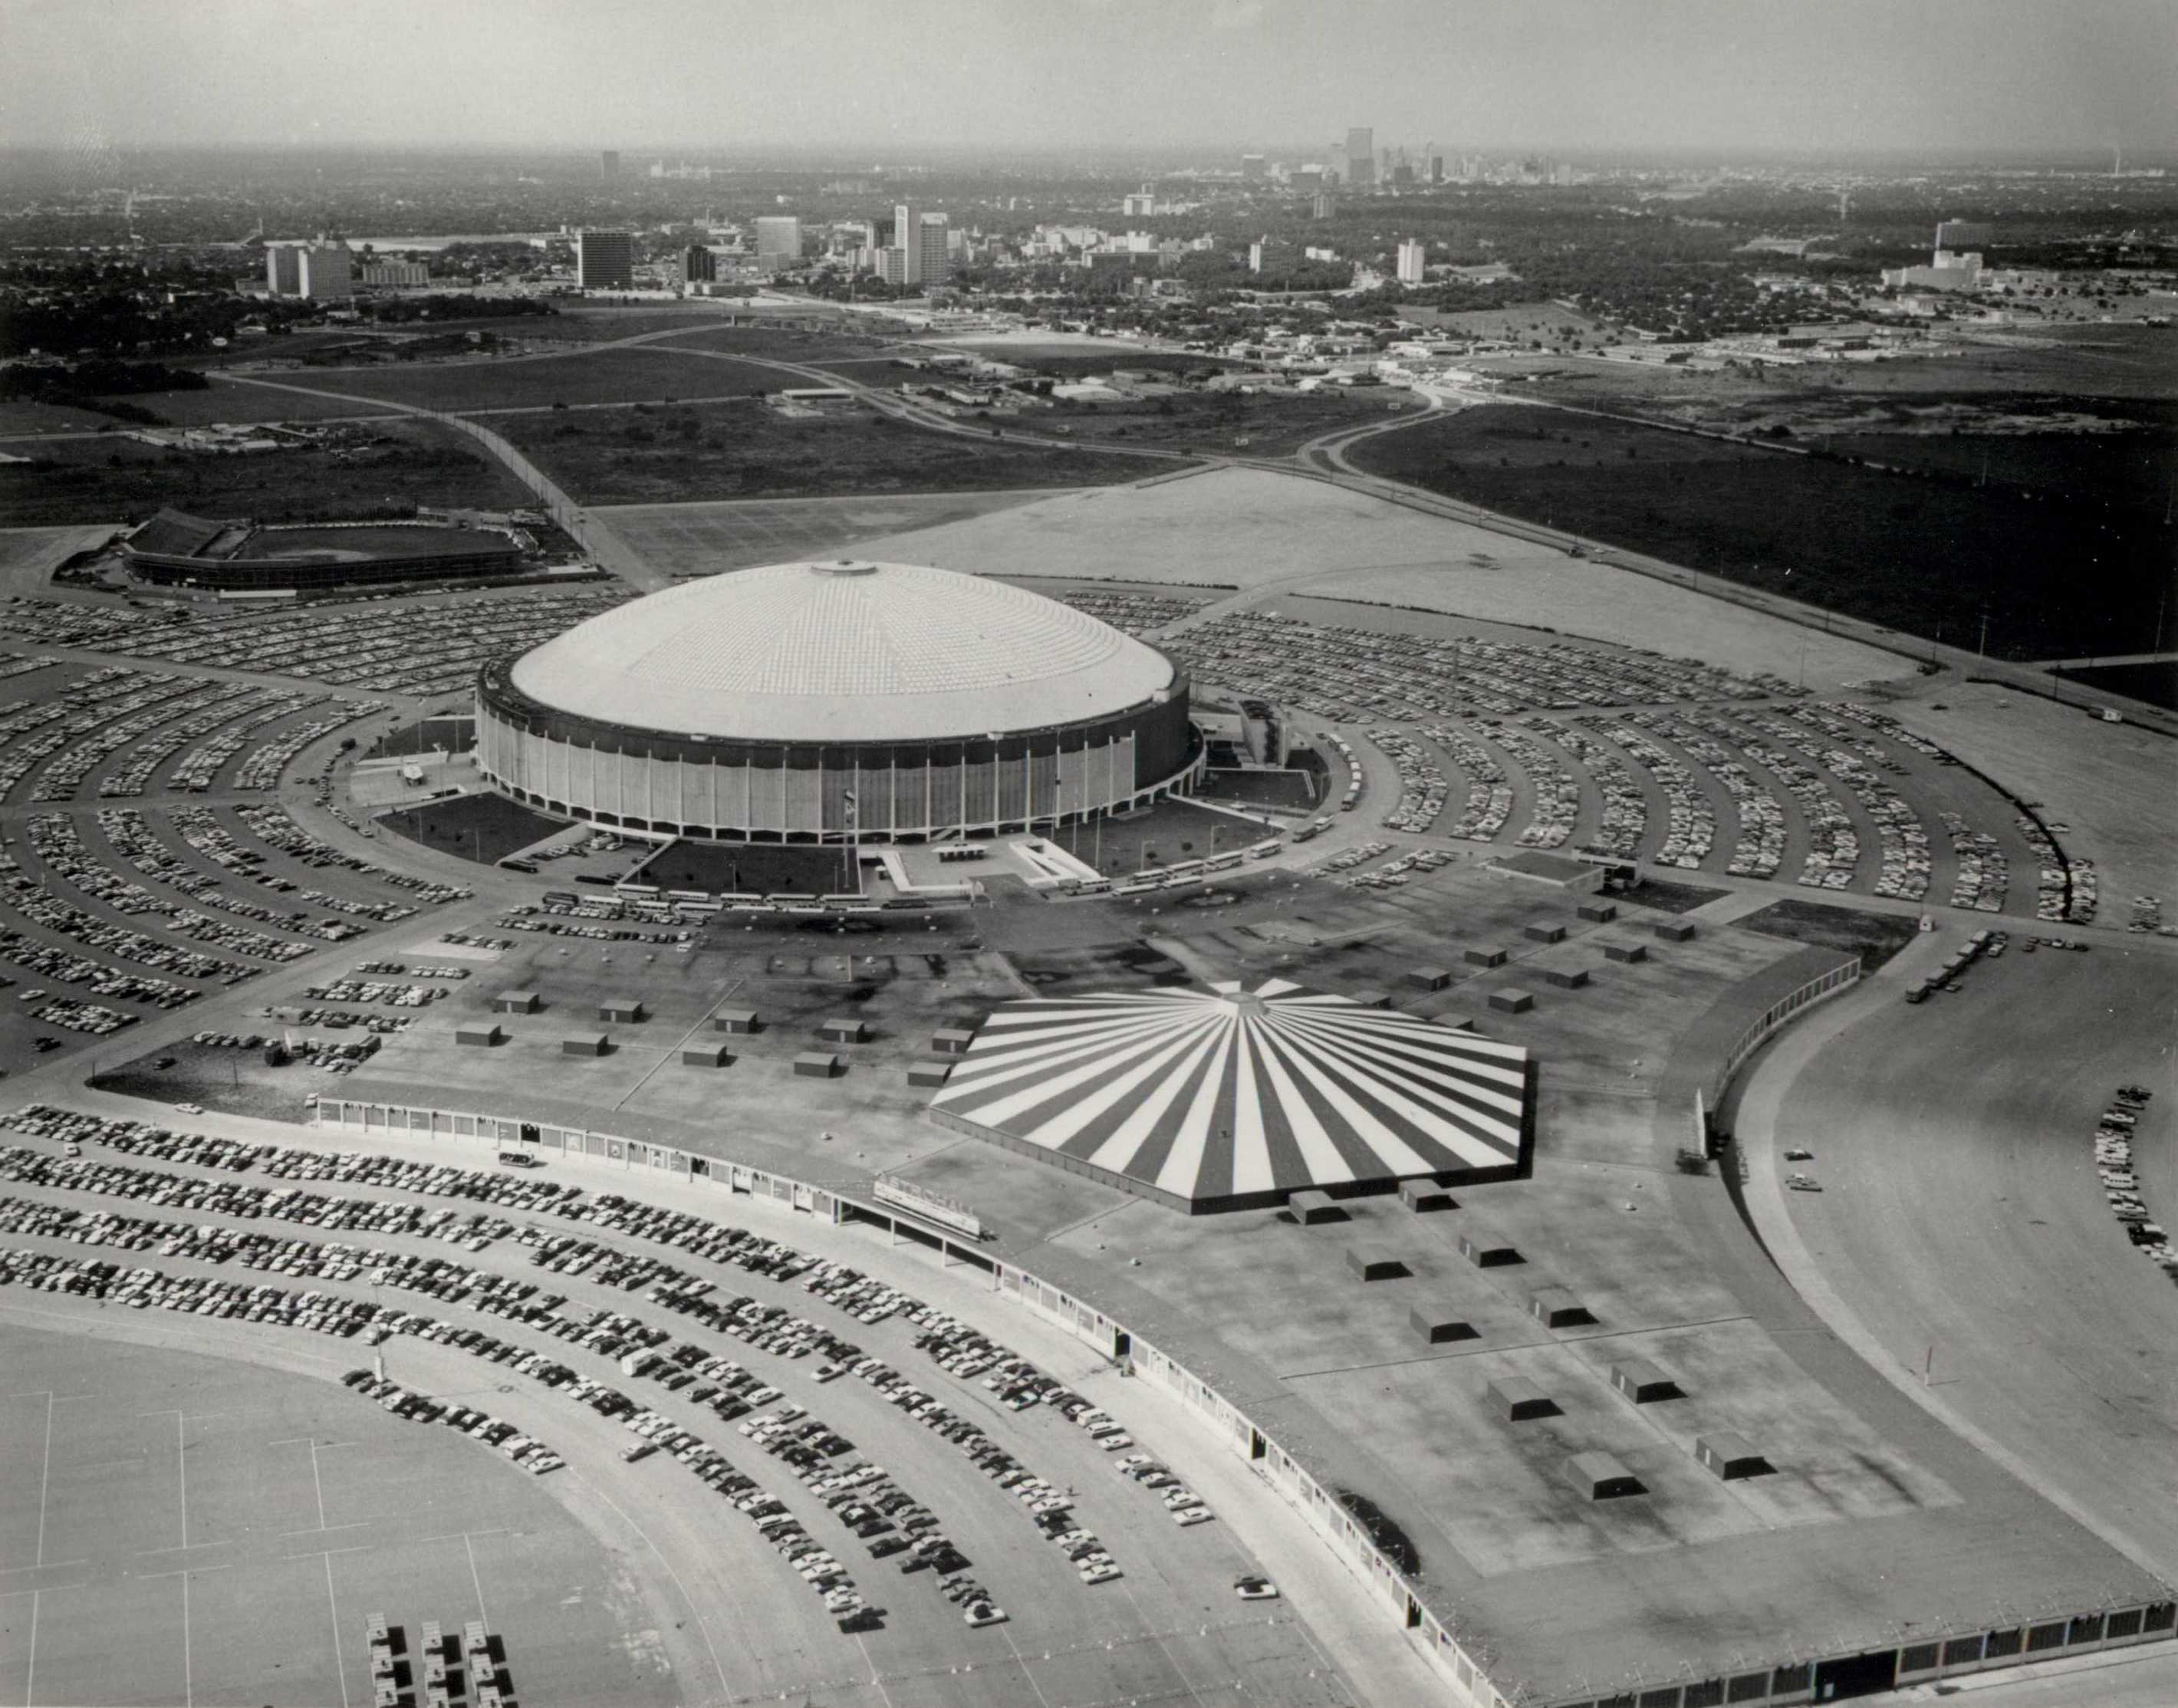 Before the Astrodome was built in 1965, the Houston team played at Colt Stadium, seen in the background.